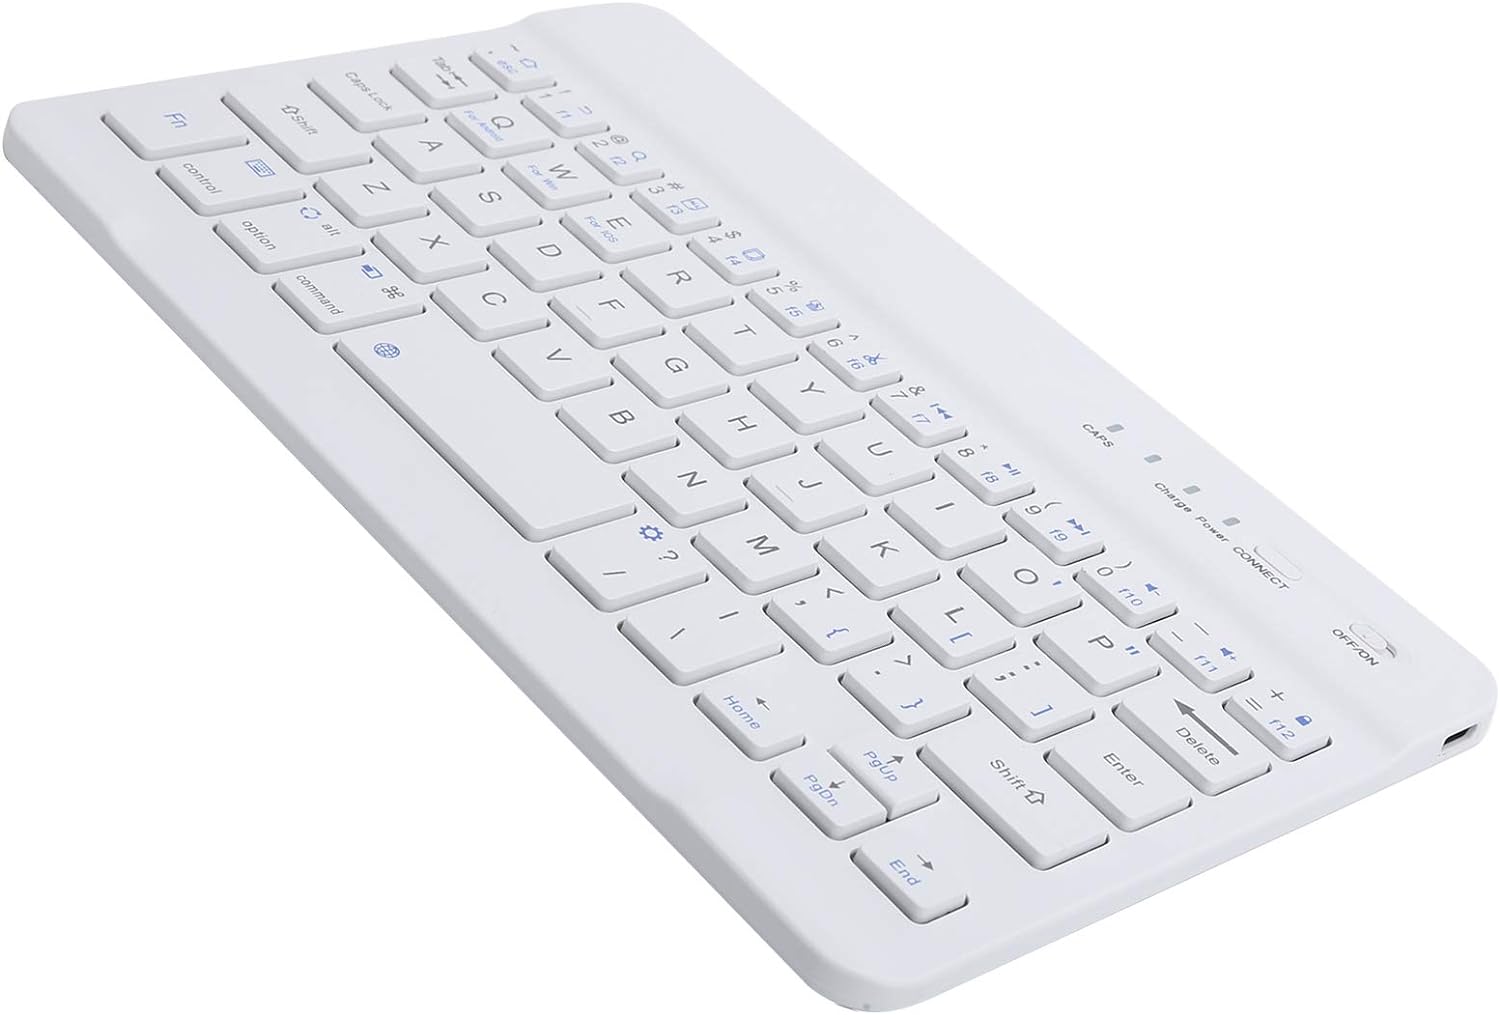  Wireless Keyboard ,  Compact Portable  Rechargeable   Ultra Slim   - NWS79 2053-3